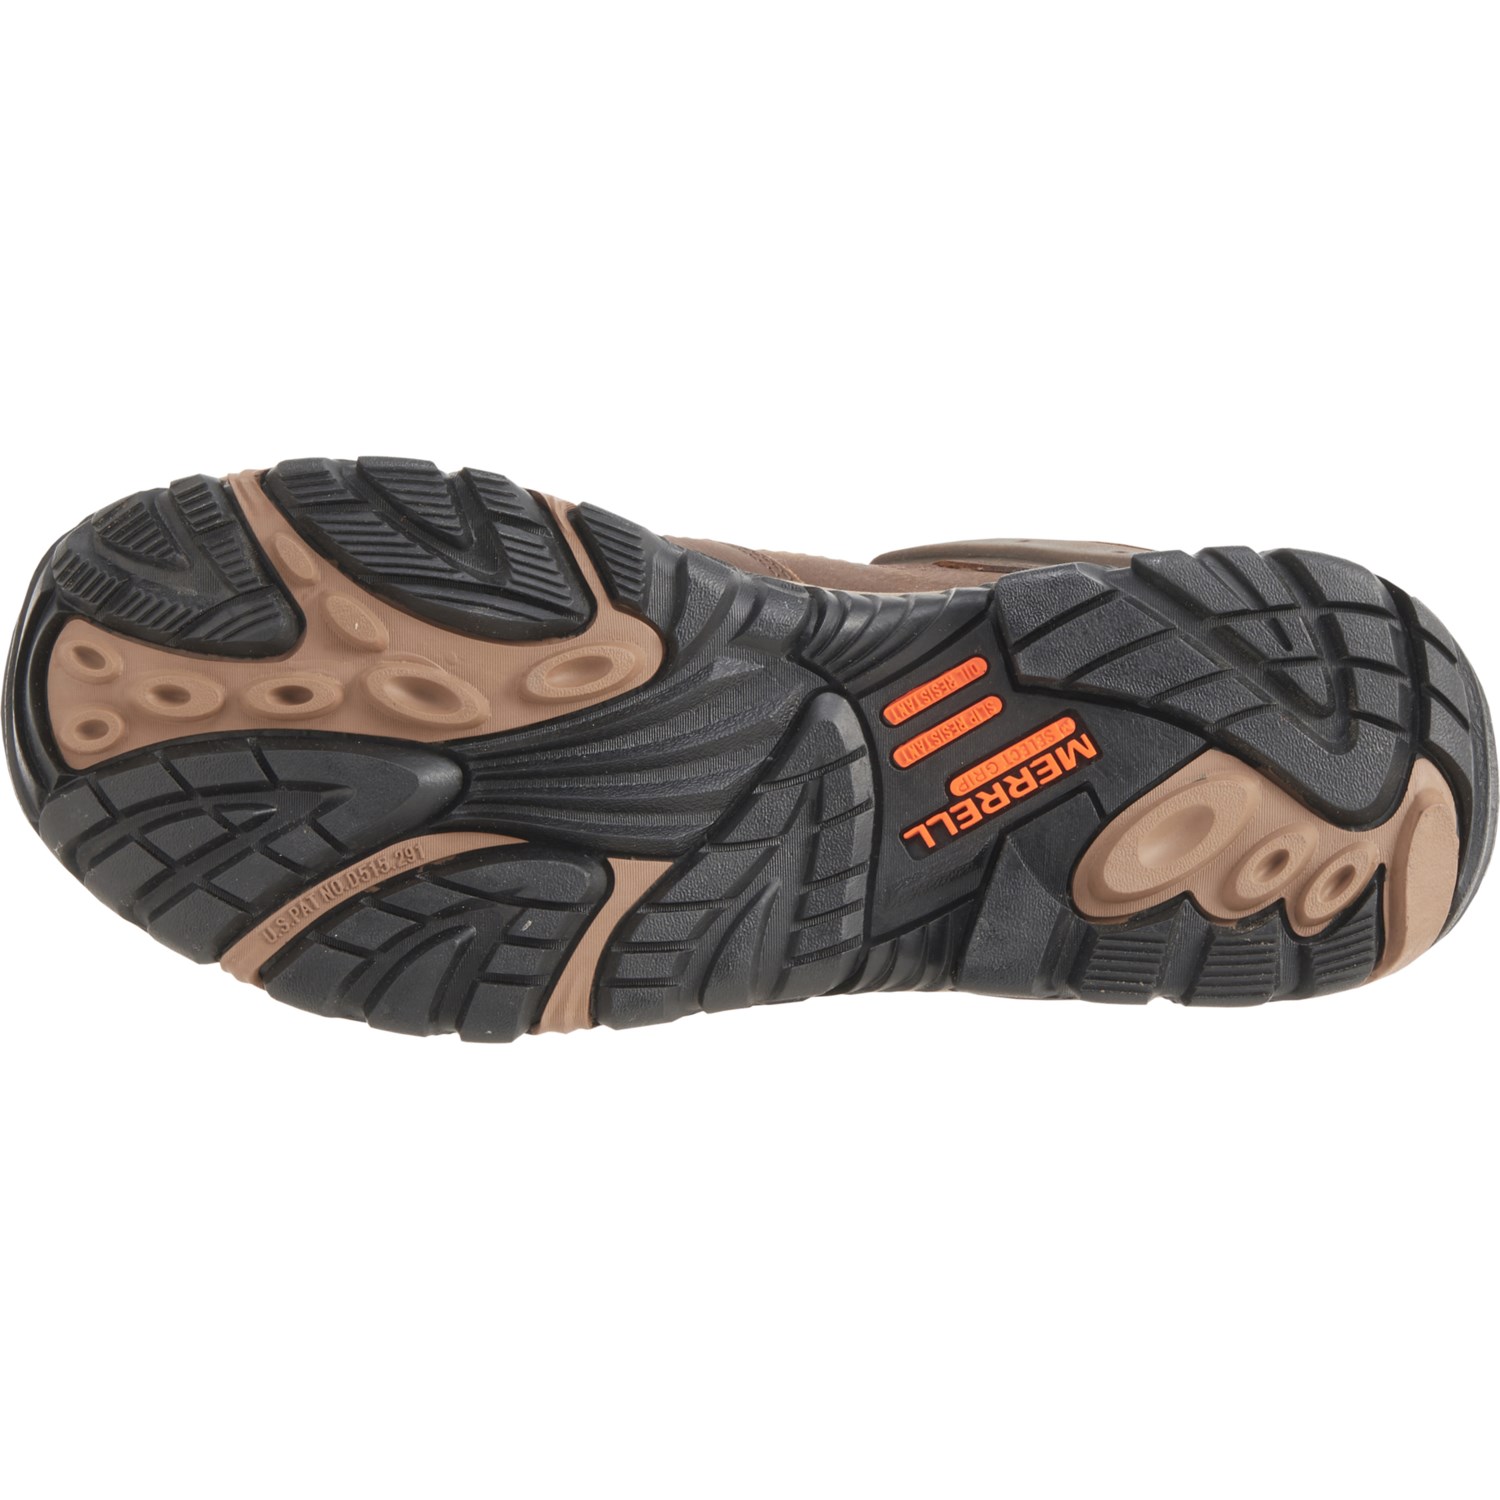 Merrell Moab Adventure Mid Boots (For Men) - Save 42%